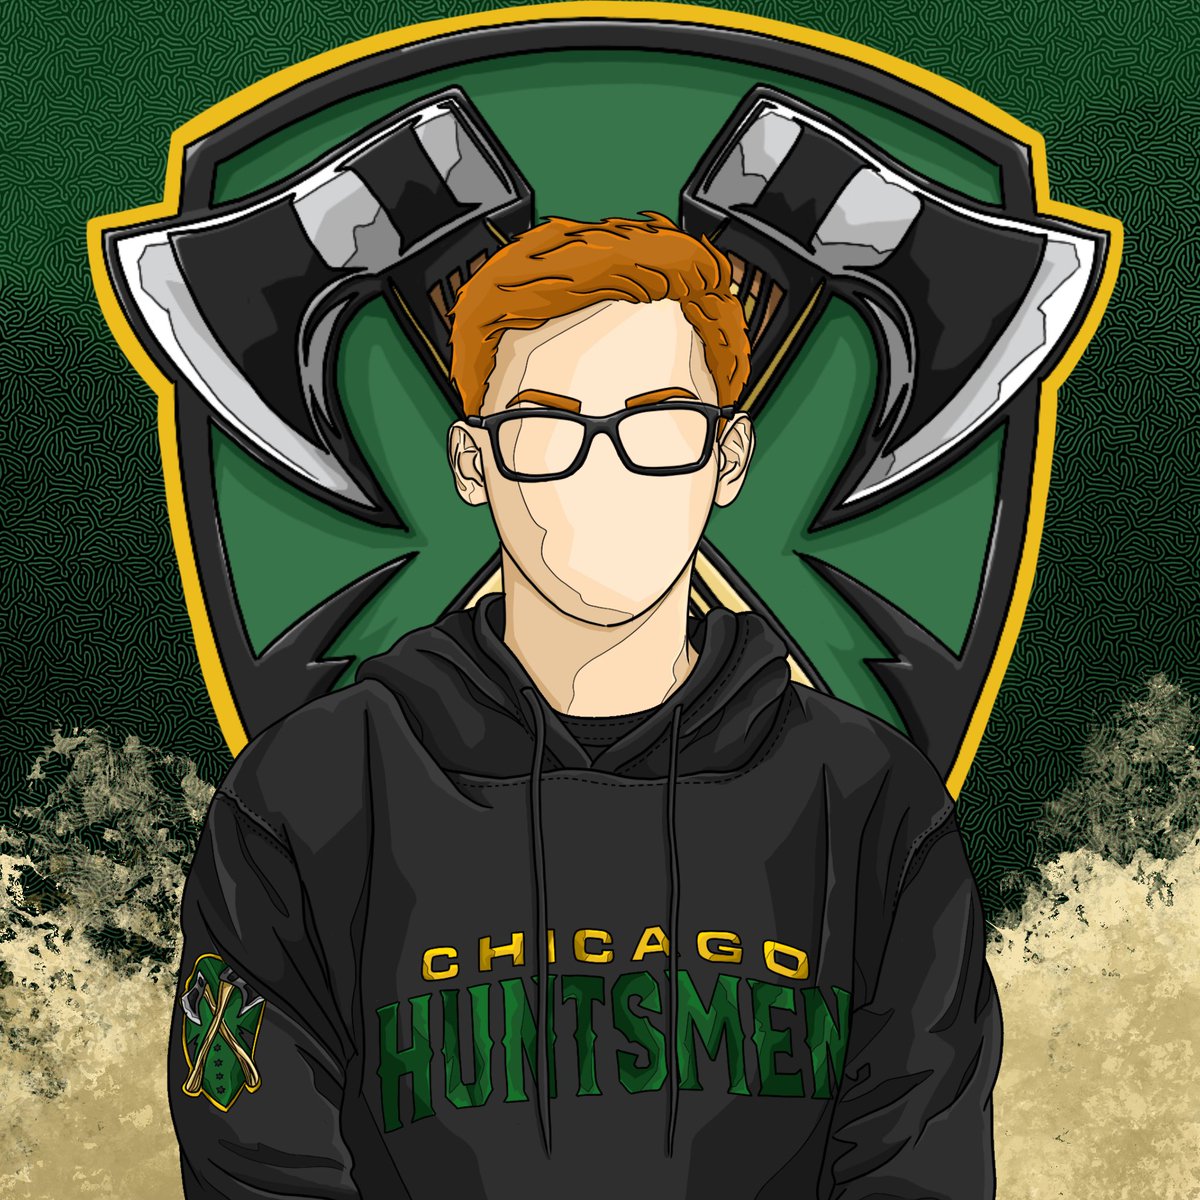 Here are some individual profiles of  @H3CZ,  @scump and  @DylanEnvoy so you can see some more of the details!